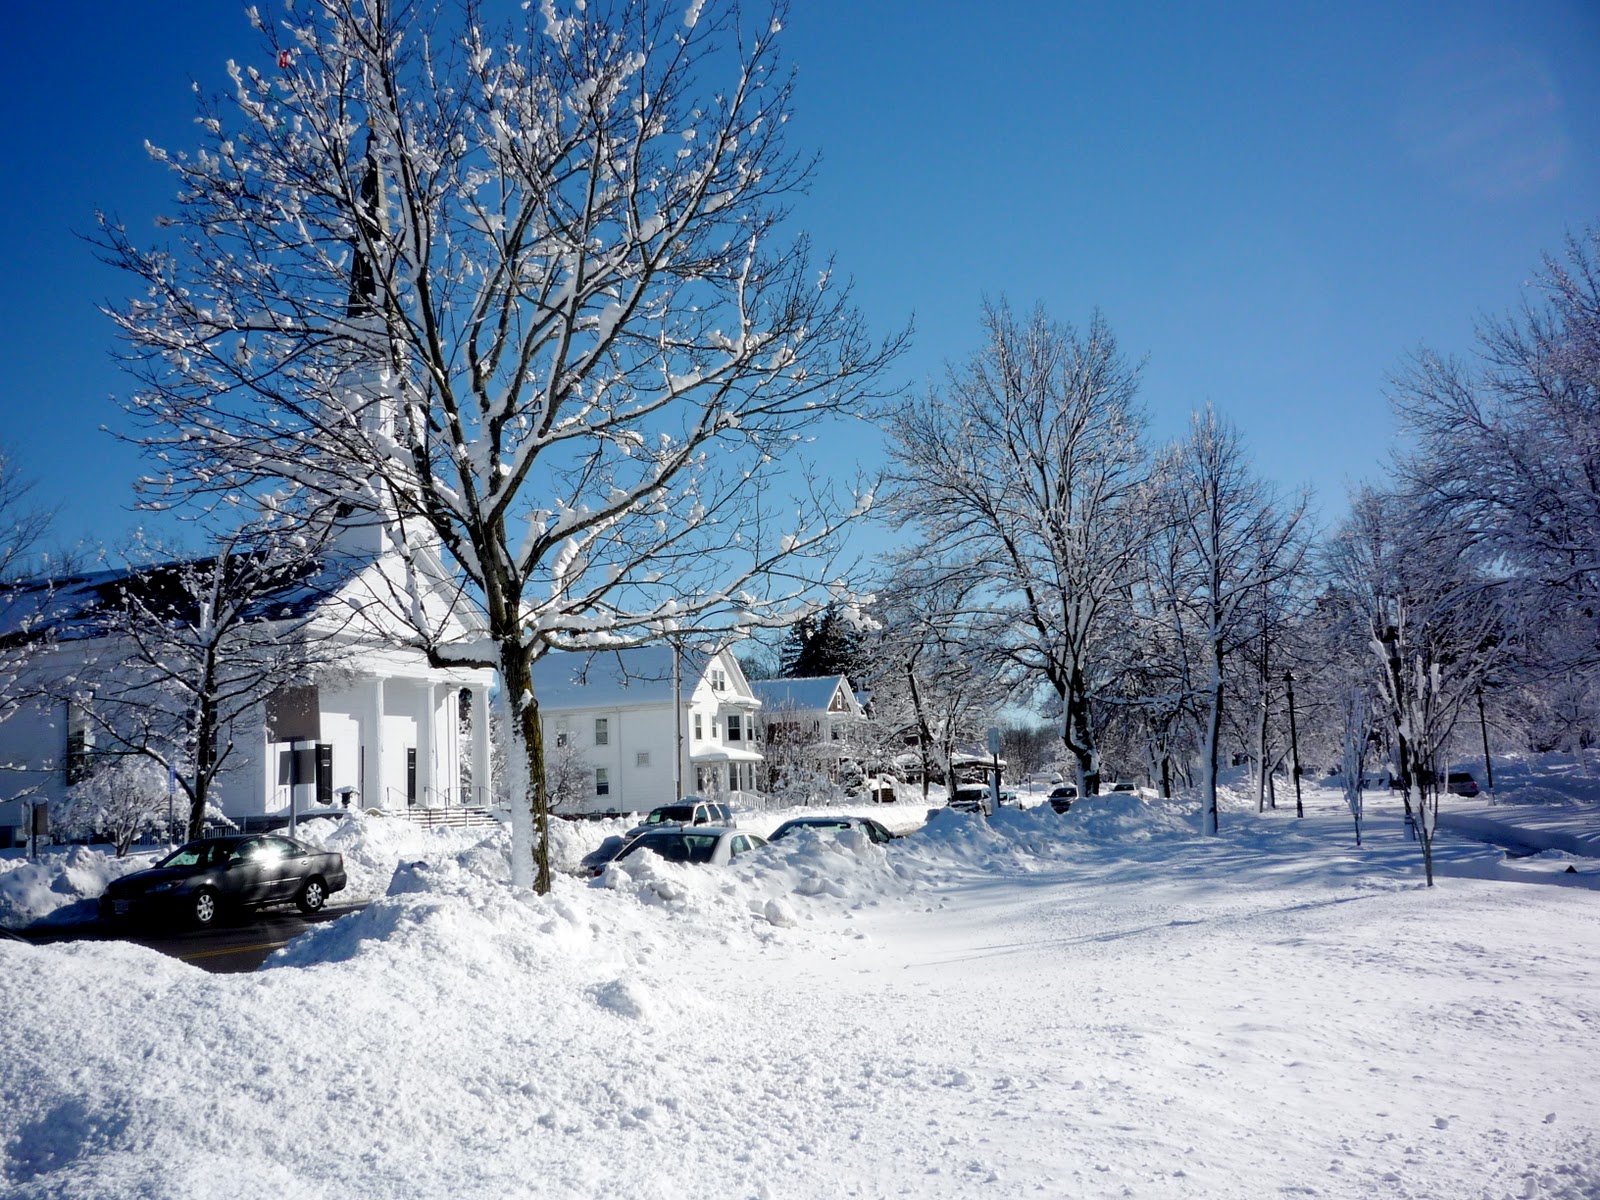 Local Travel Guide for New England: Classic New England Winter Scenes